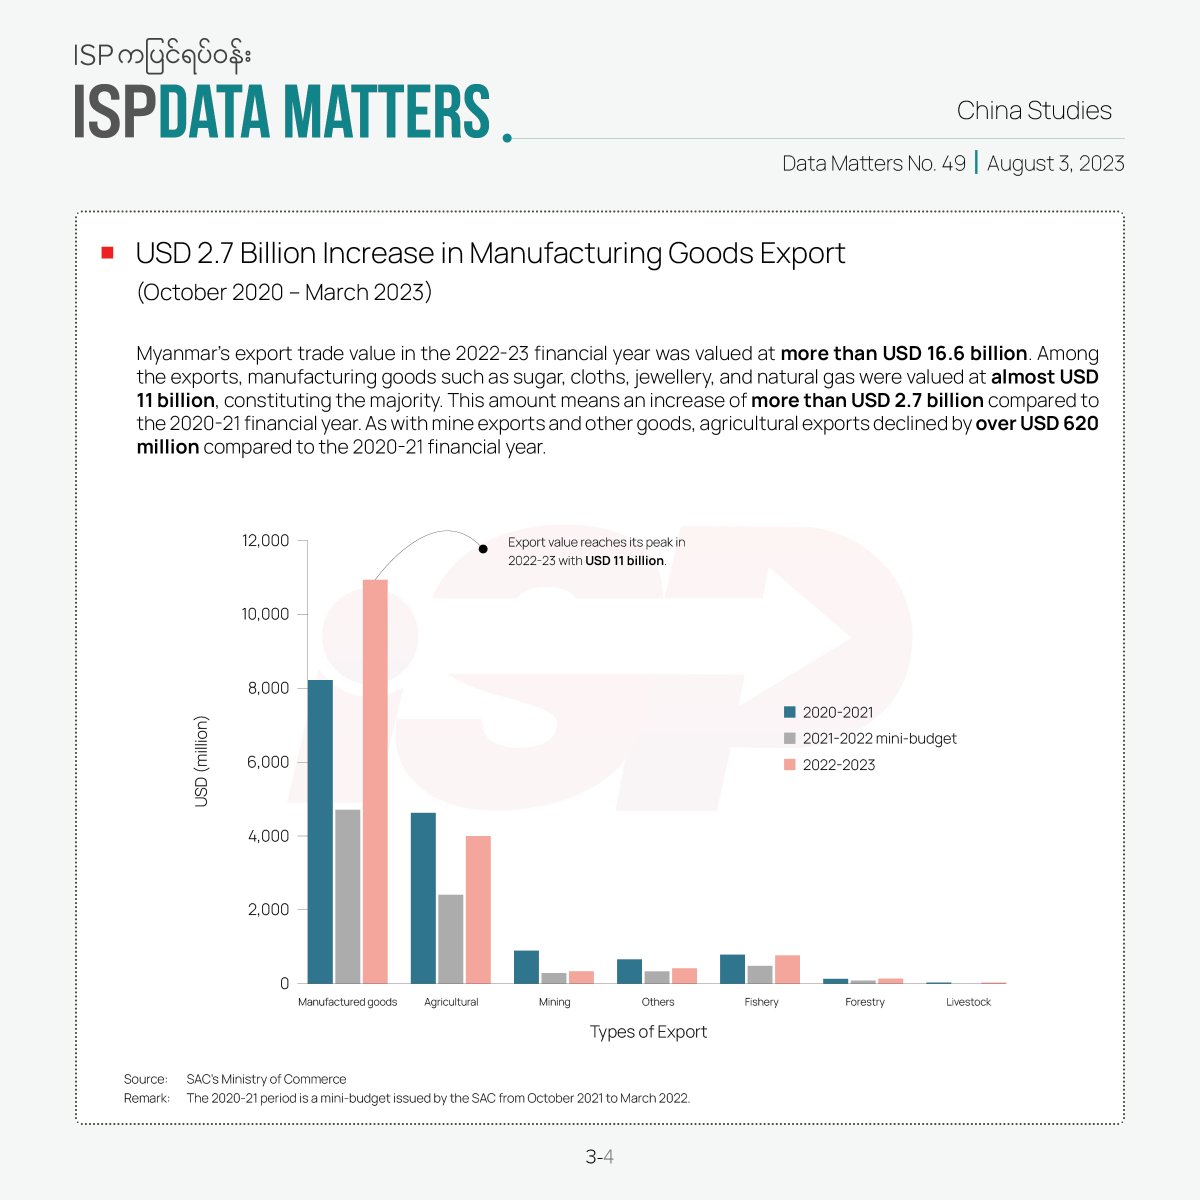 ISP Data Matters No. 49 

Manufacturing goods such as sugar, cloths, jewellery and natural gas constituted the majority of Myanmar's export in the 2022-23 financial year. 

Full article: ispmyanmar.com/community/wp-c…

#ISPDataMatters #ChinaStudies